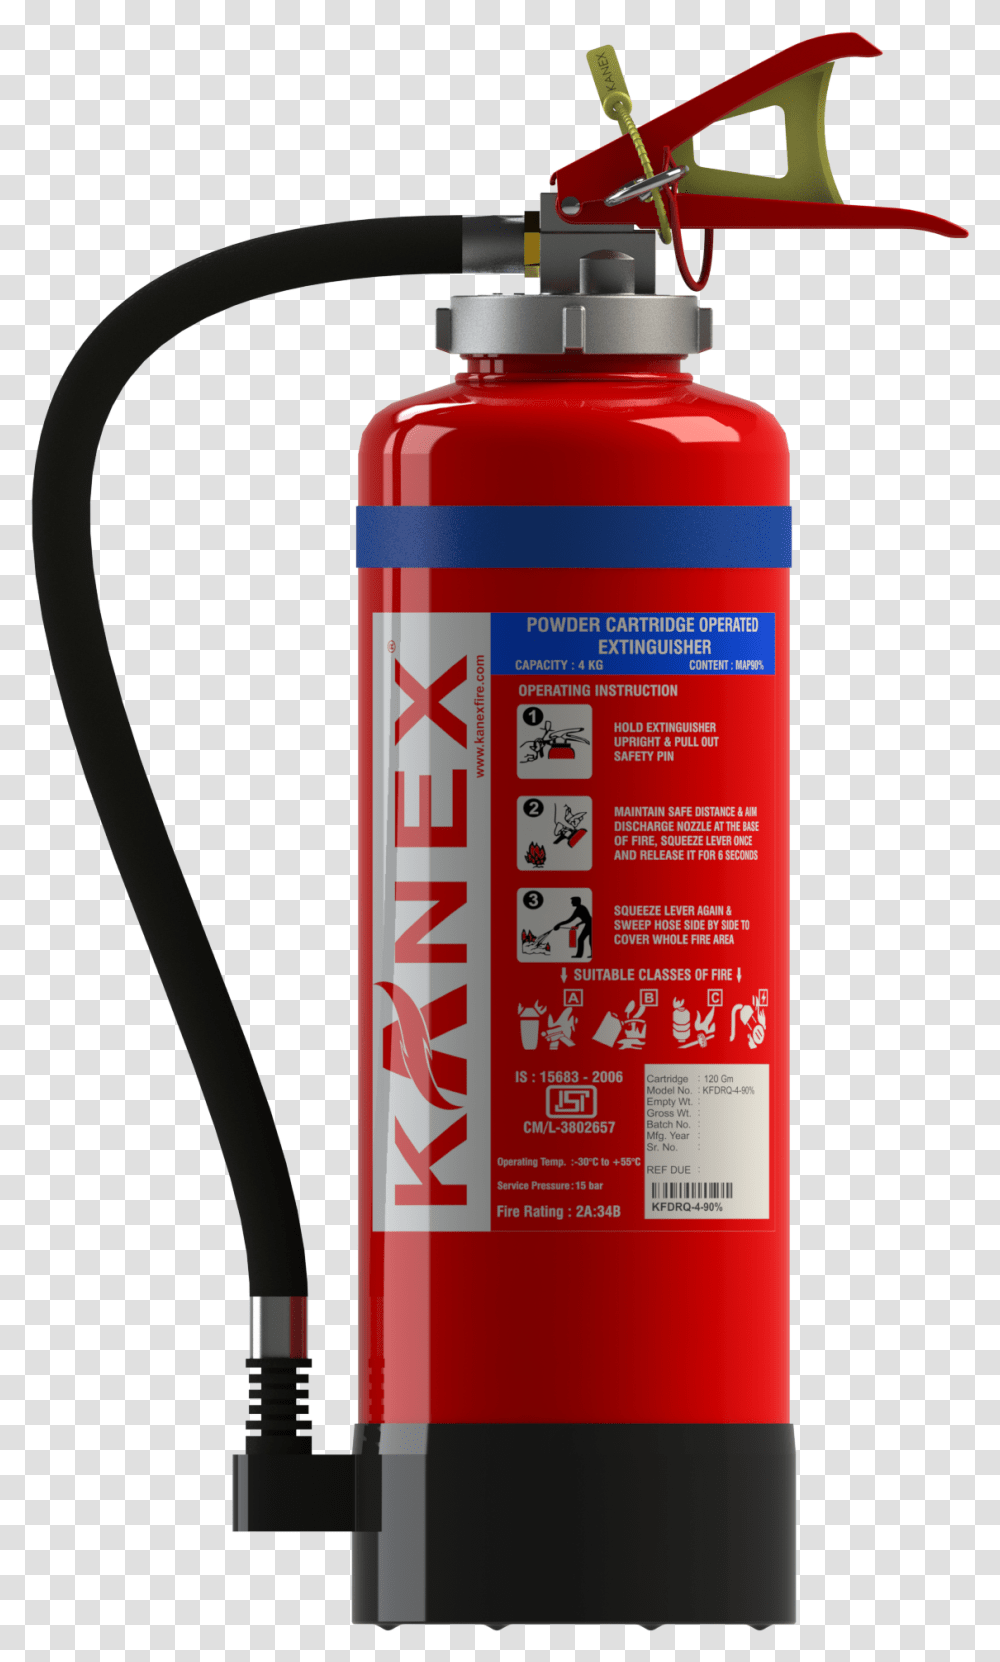 Extinguisher Images Free Download Background Fire Extinguisher, Bottle, Gas Pump, Machine, Spray Can Transparent Png